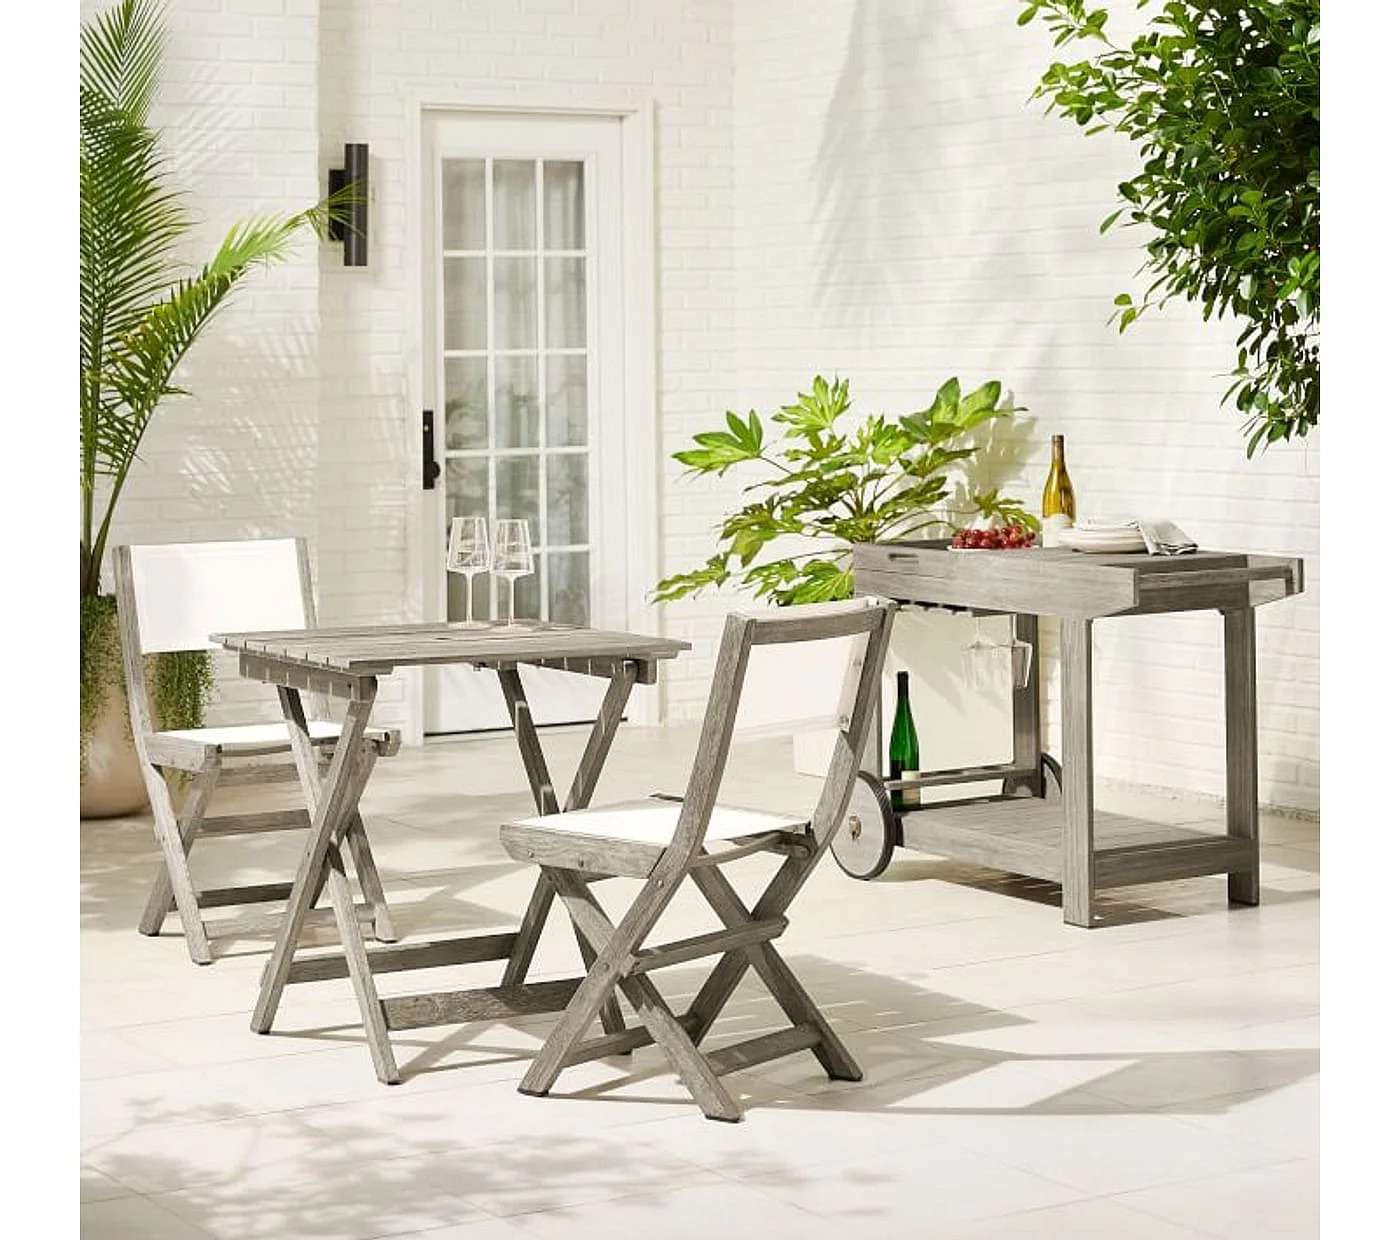 Agma Outdoor Chair And Table Set